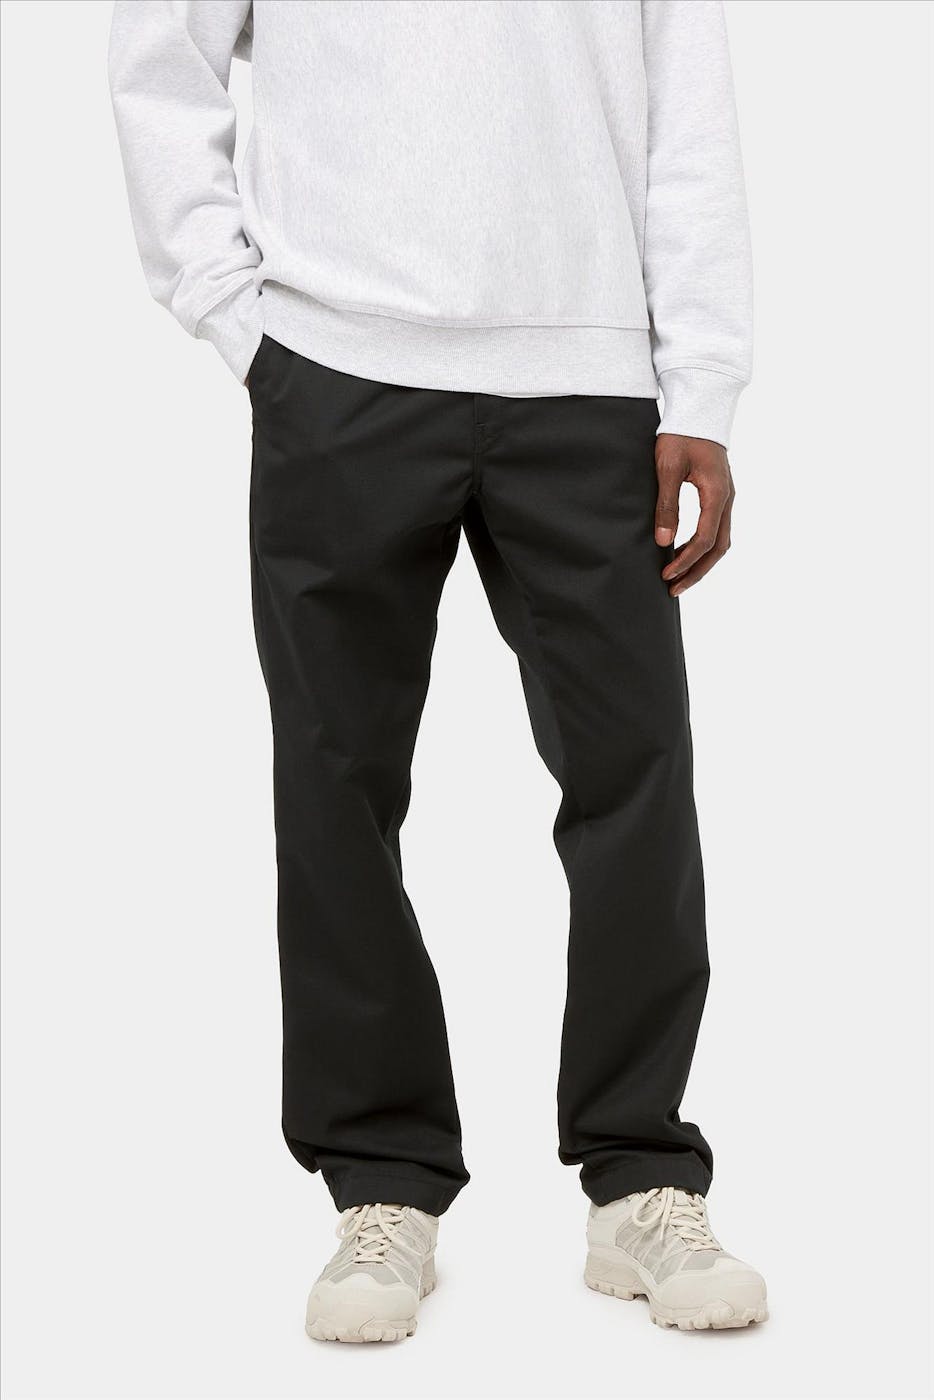 Carhartt WIP - Zwarte relaxed tapered Master Pant